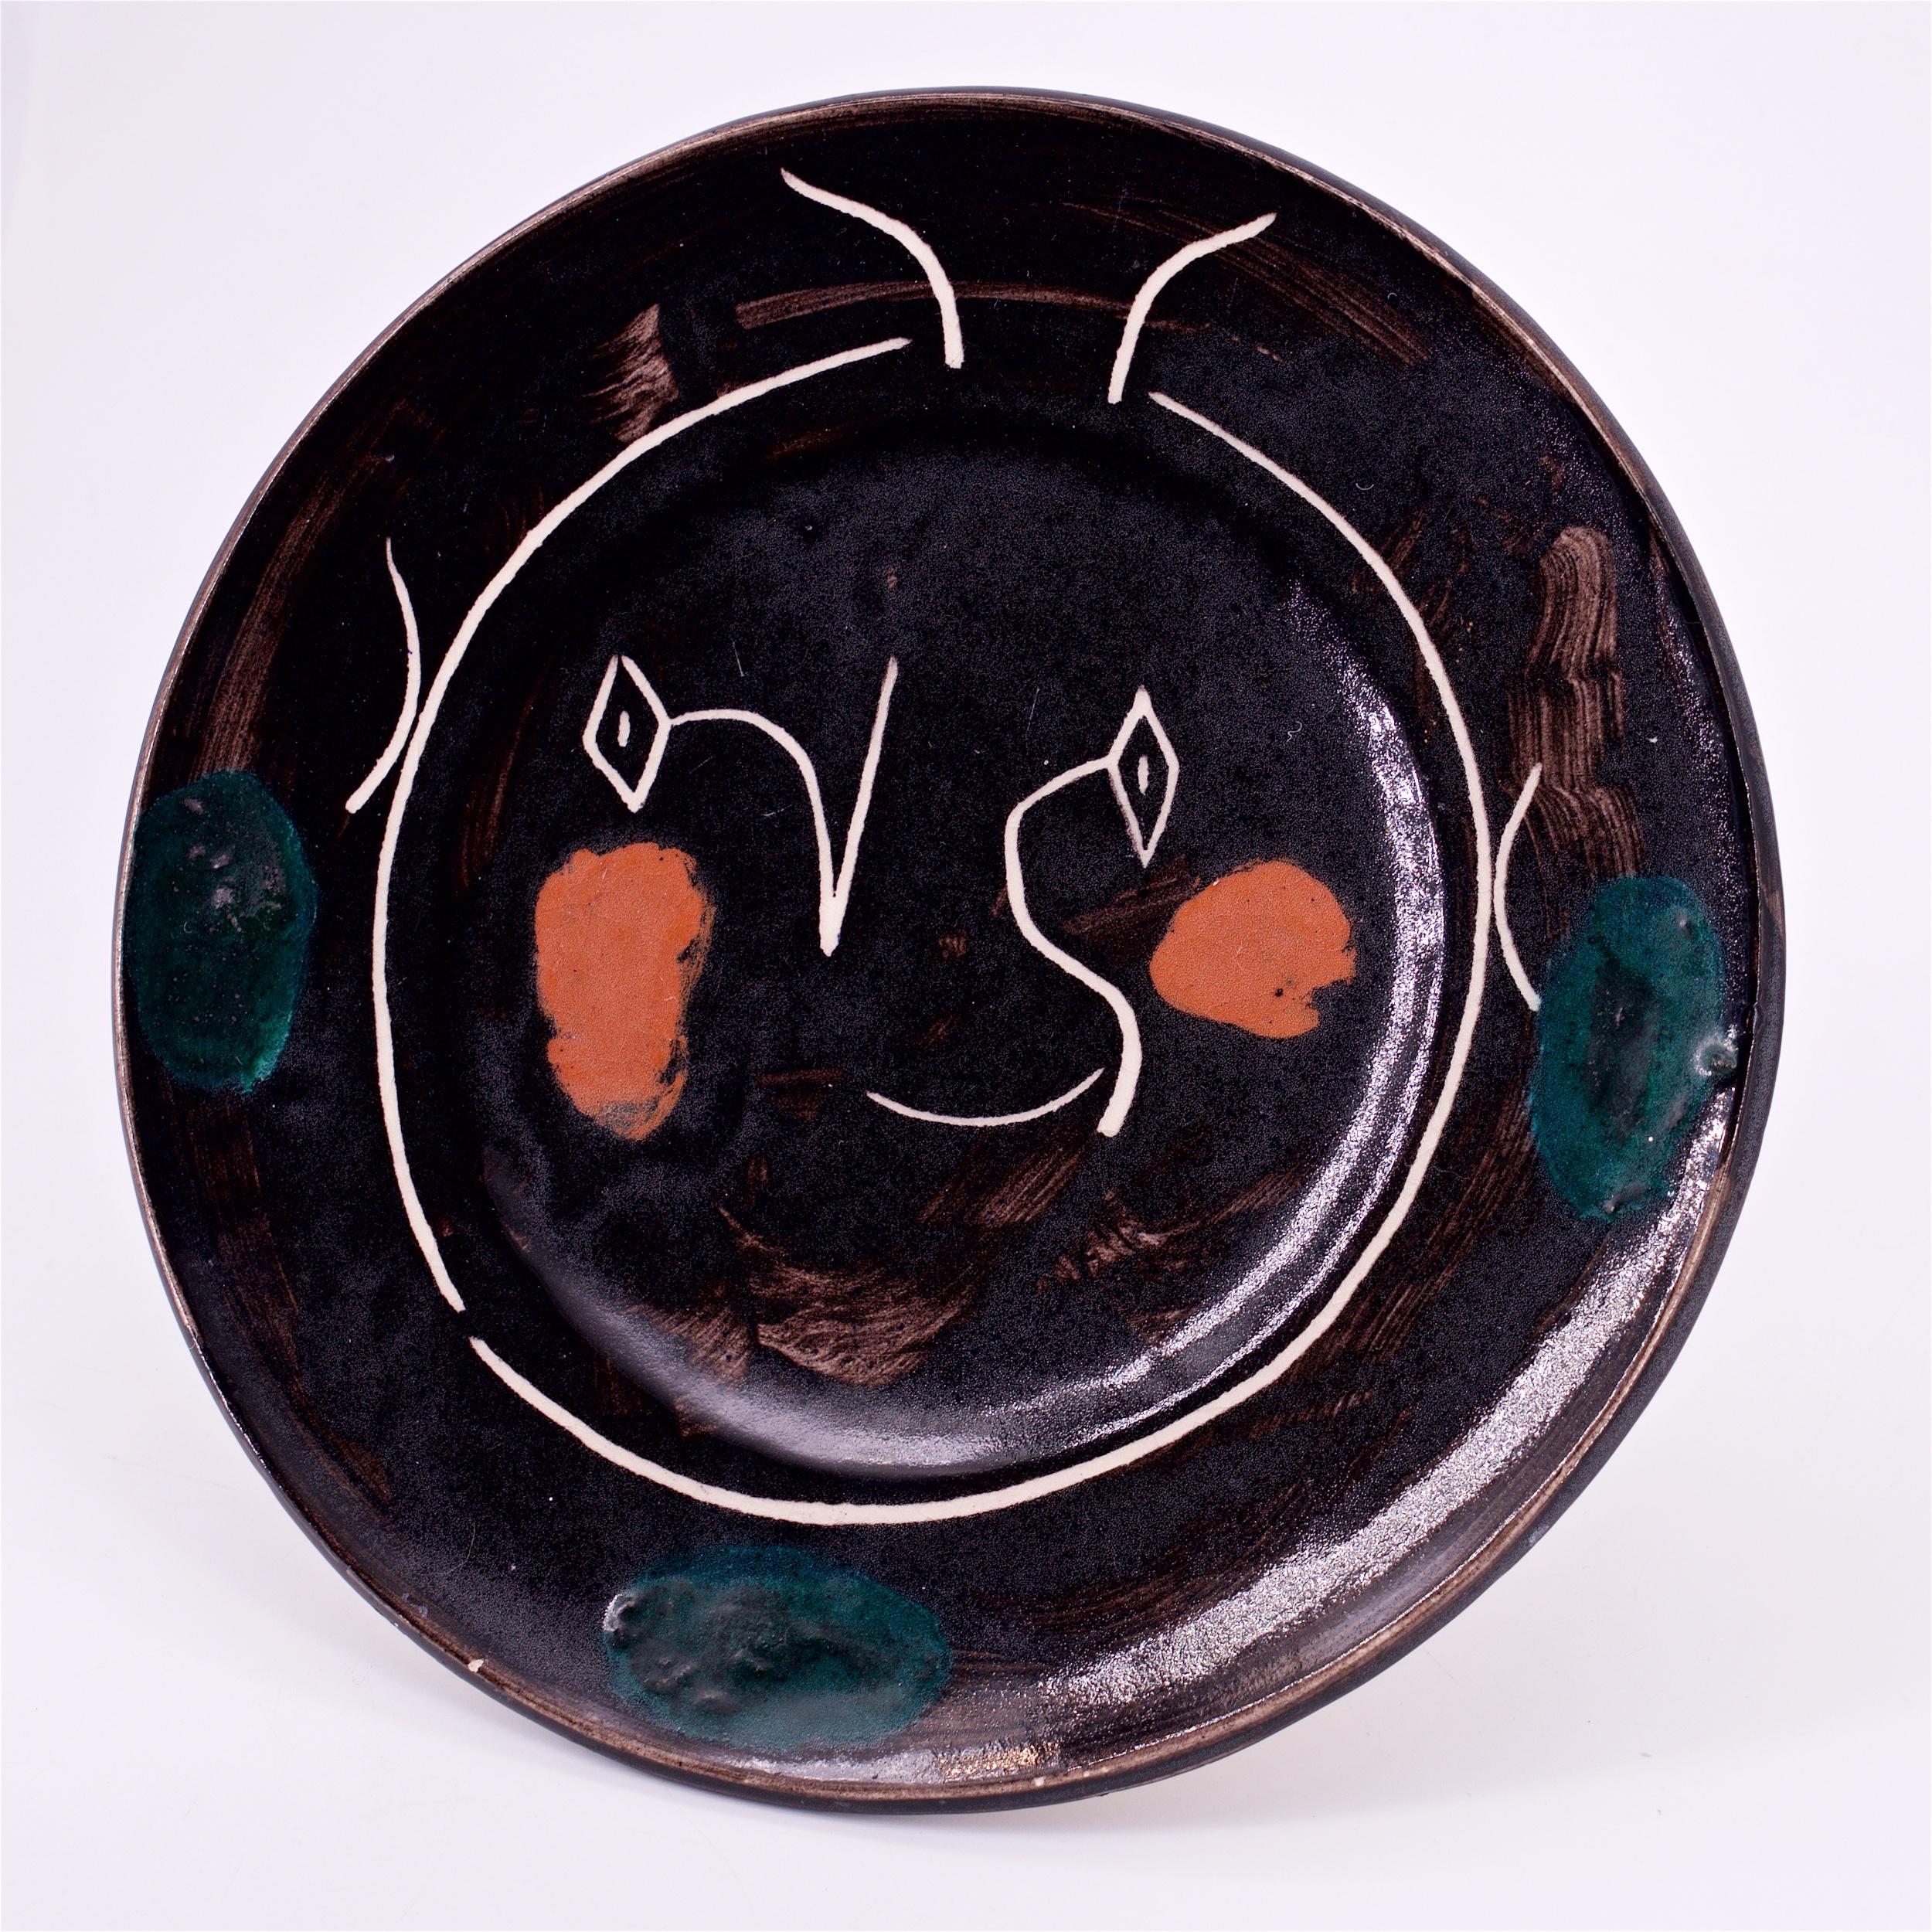 Black face service plate, glazed white earthenware, painted in colors; white, orange, and deep greys. Made in 1948, from an edition of 100, inscribed 'EDITION PICASSO' and 'B', with the 'Madoura PLEIN FEU' and 'EDITION PICASSO' pottery stamps on the